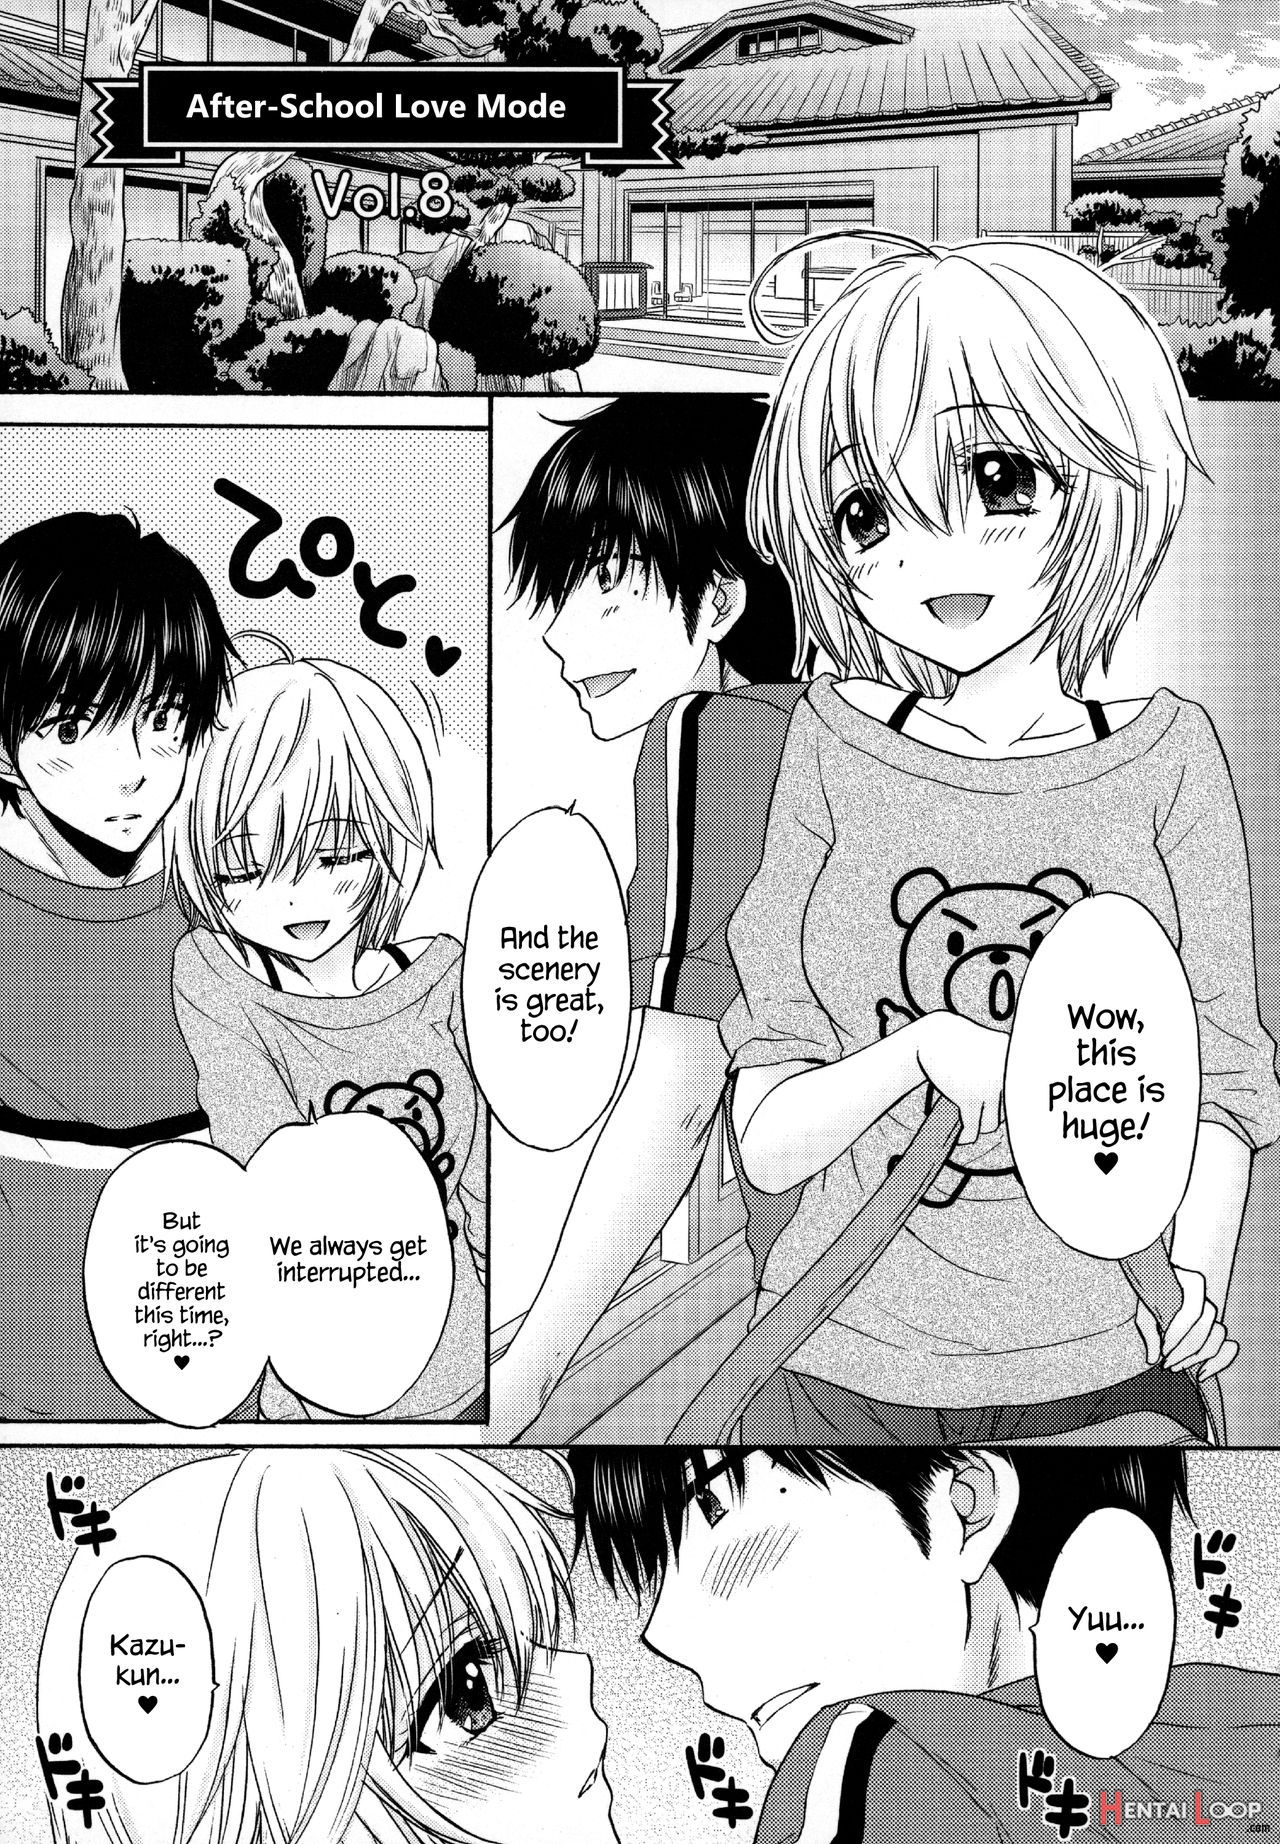 Houkago Love Mode â€“ It Is A Love Mode After School page 194